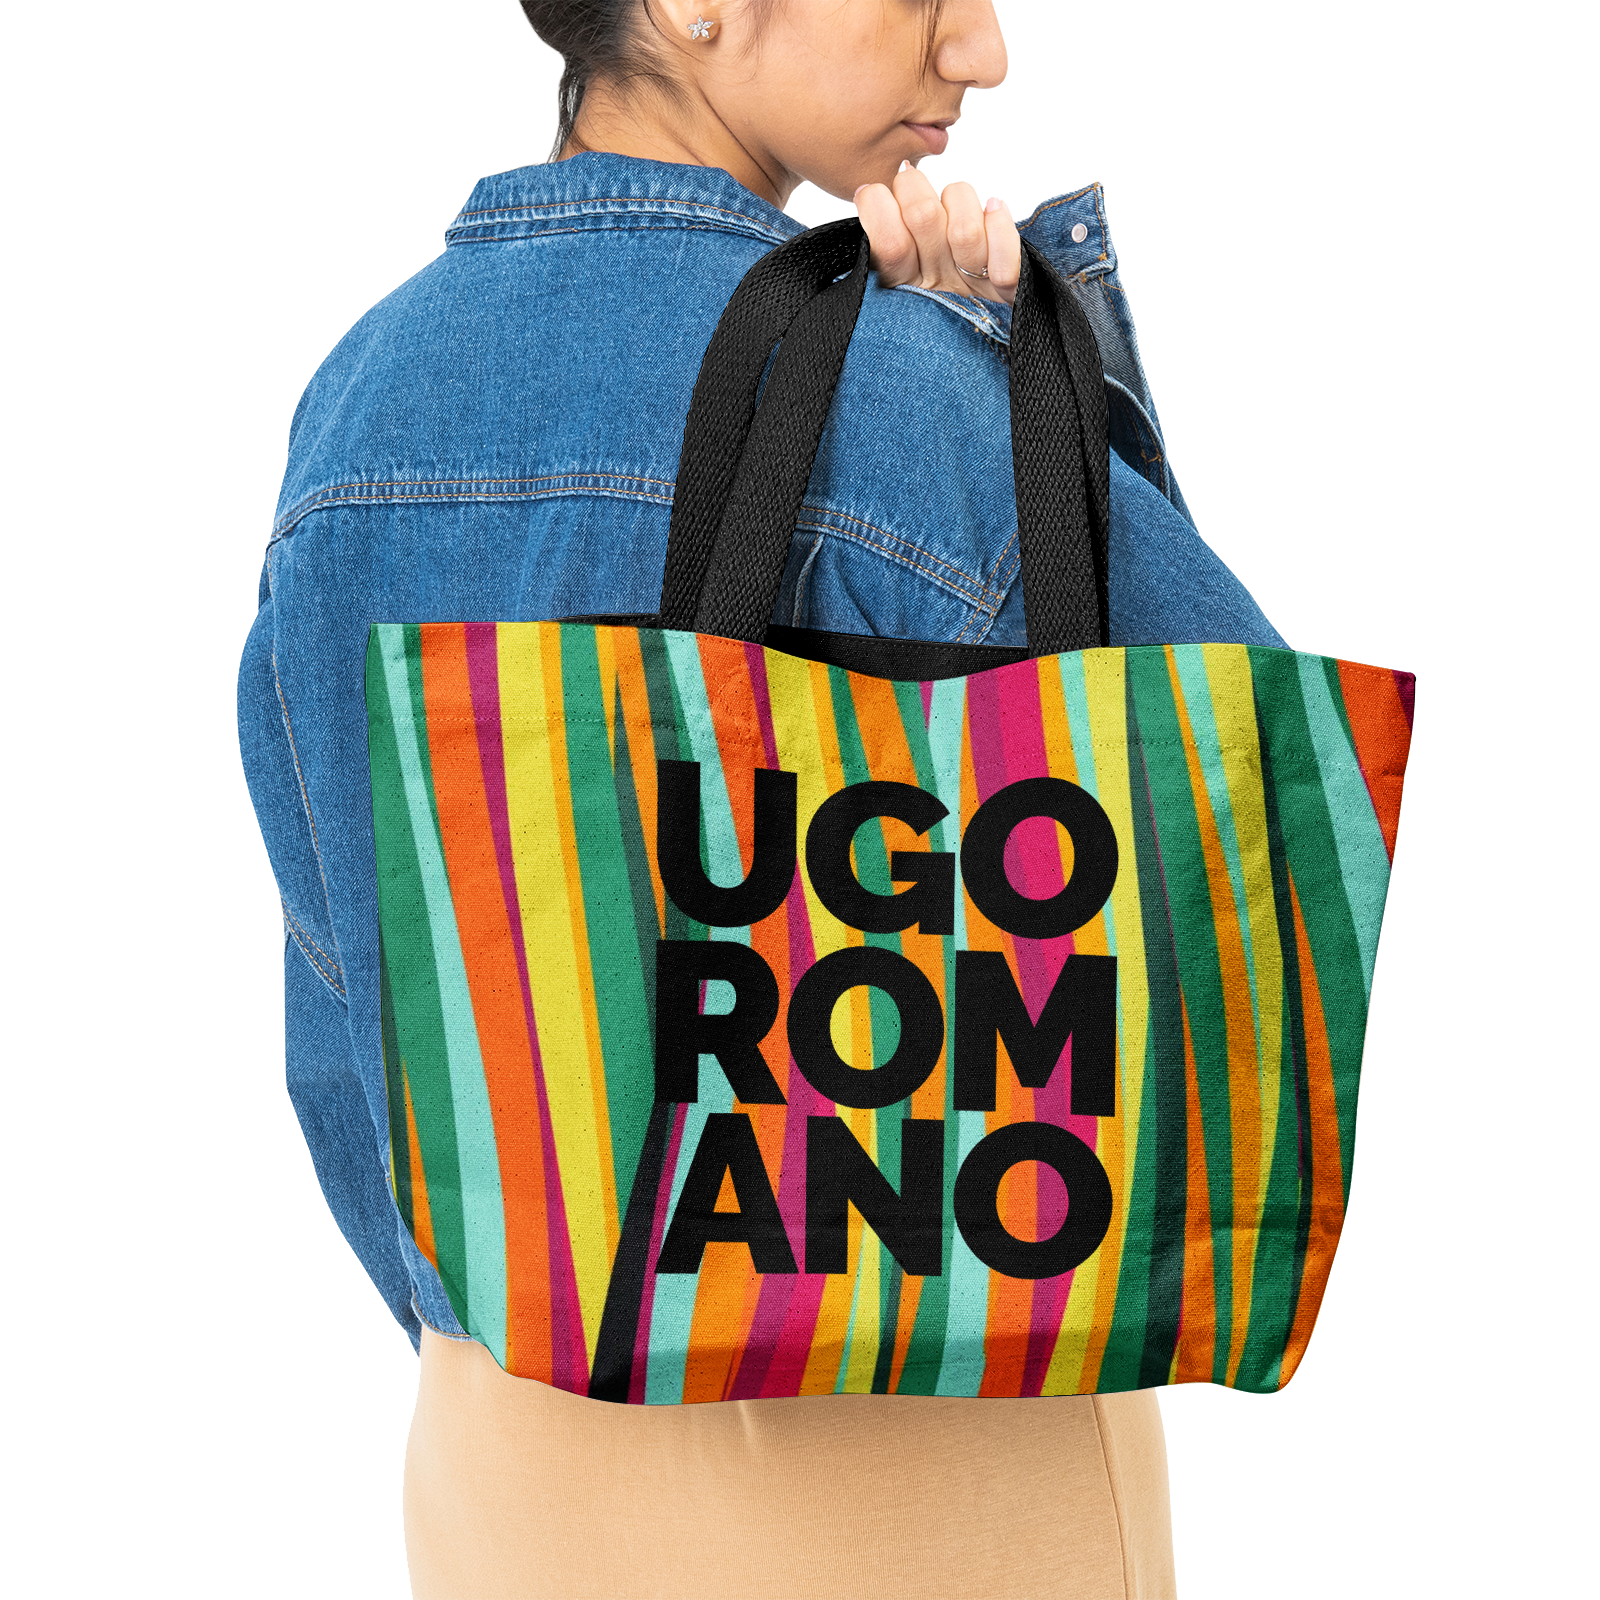 Heavy Duty and Strong Natural Cotton Canvas Tote Bag - UGO ROMANO URTB054